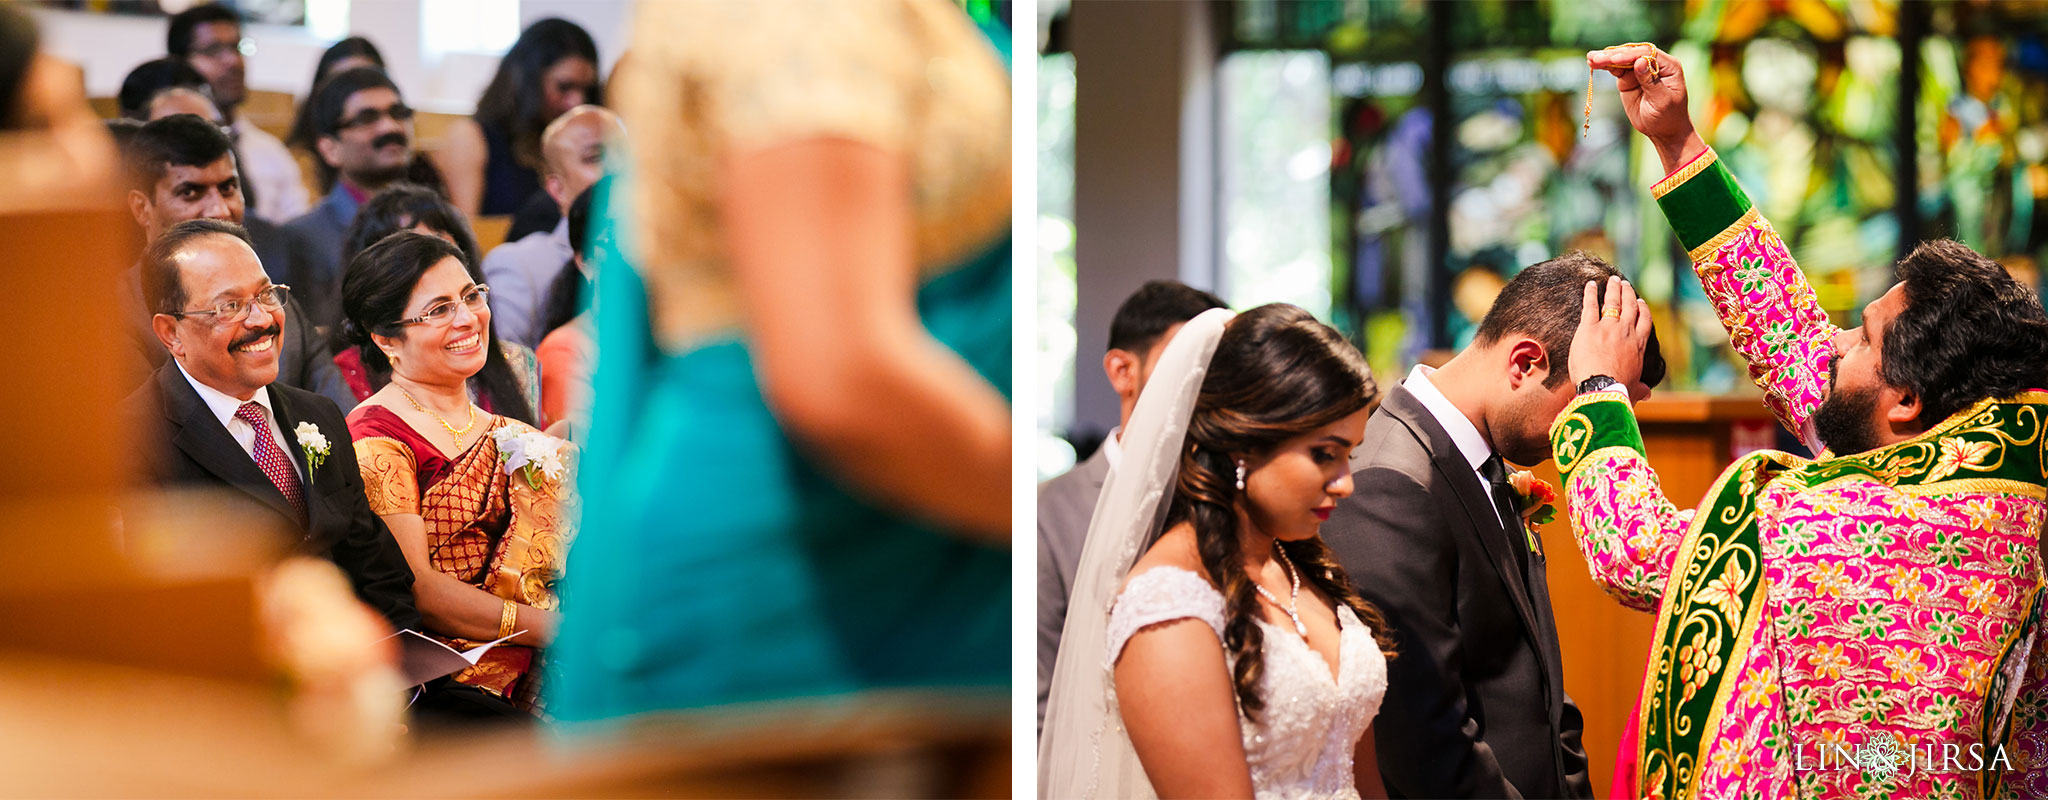 22 claremont united church of christ indian wedding photography